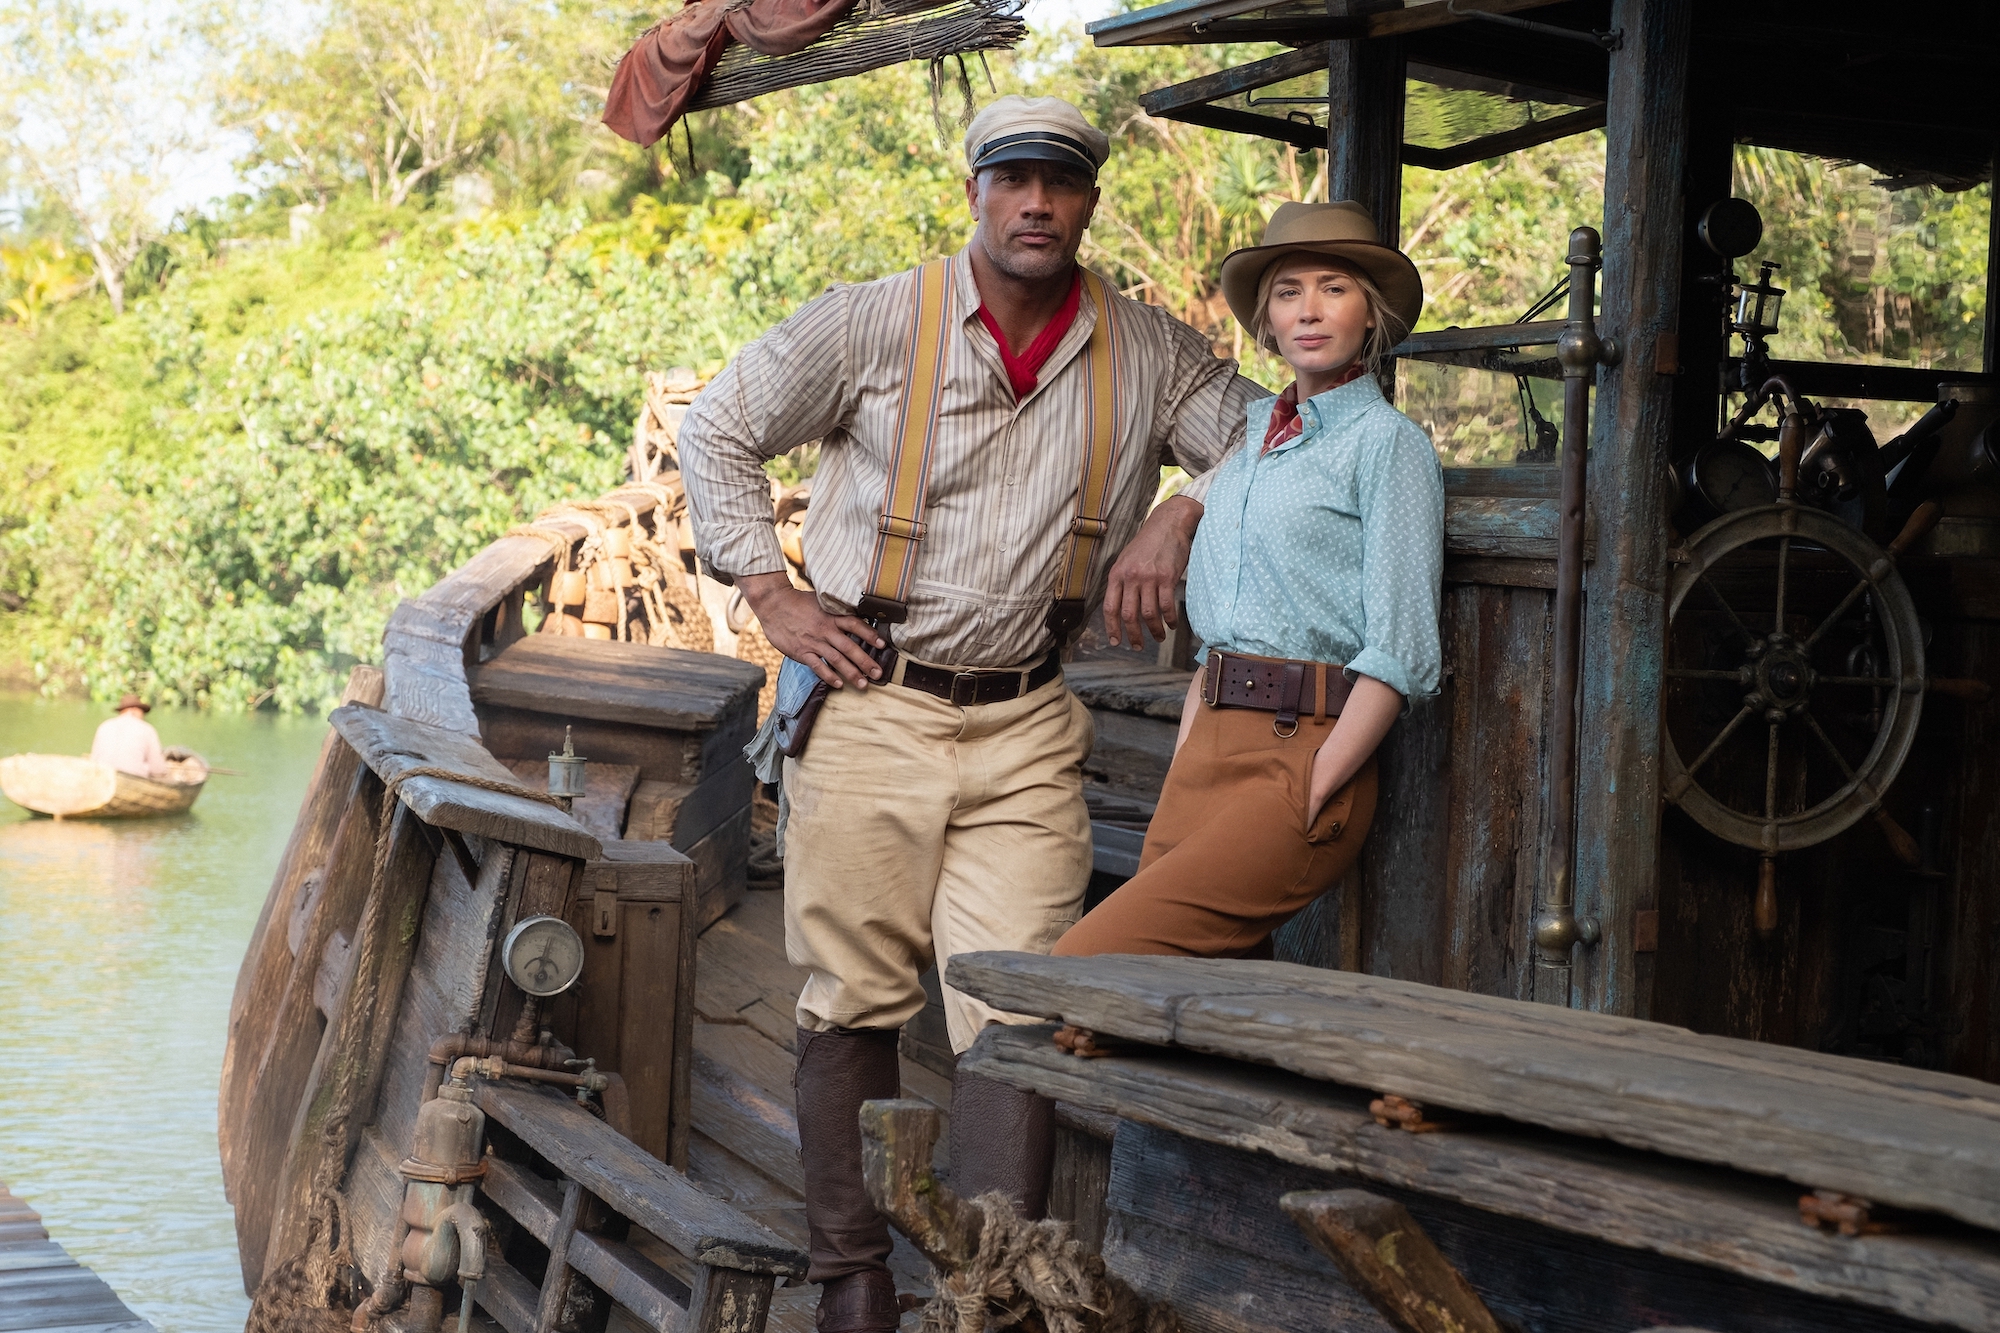 Jungle cruise captain Dwayne "The Rock" Johnson and passenger Emily Blunt lean on the boat